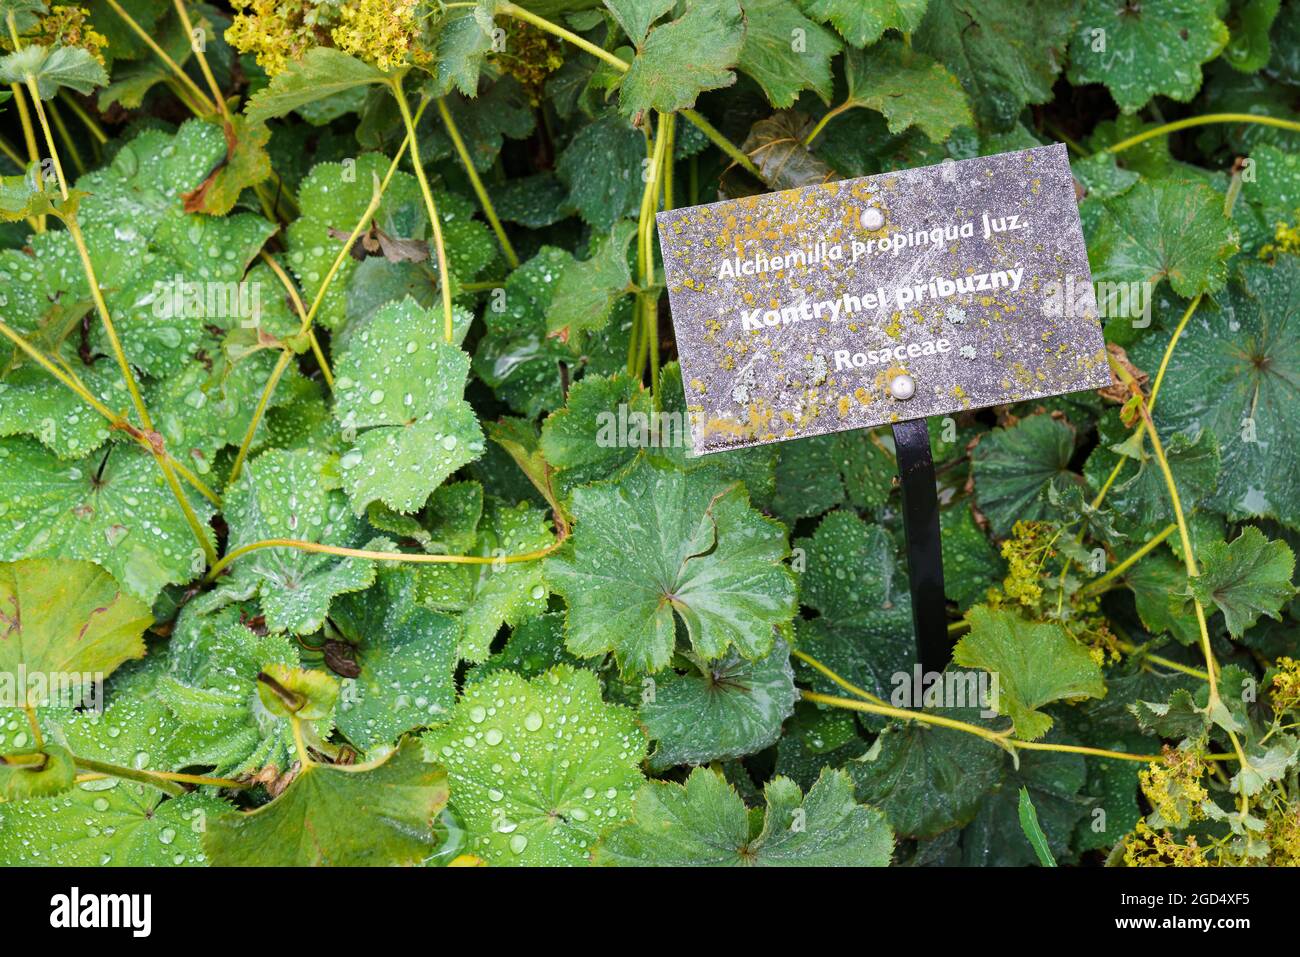 Healing herbs plant Alchemilla vulgaris, Alchemilla Glaucescens, Alchemilla mollis, Alchemilla propinqua, the garden lady's-mantle or lady's-mantle, i Stock Photo